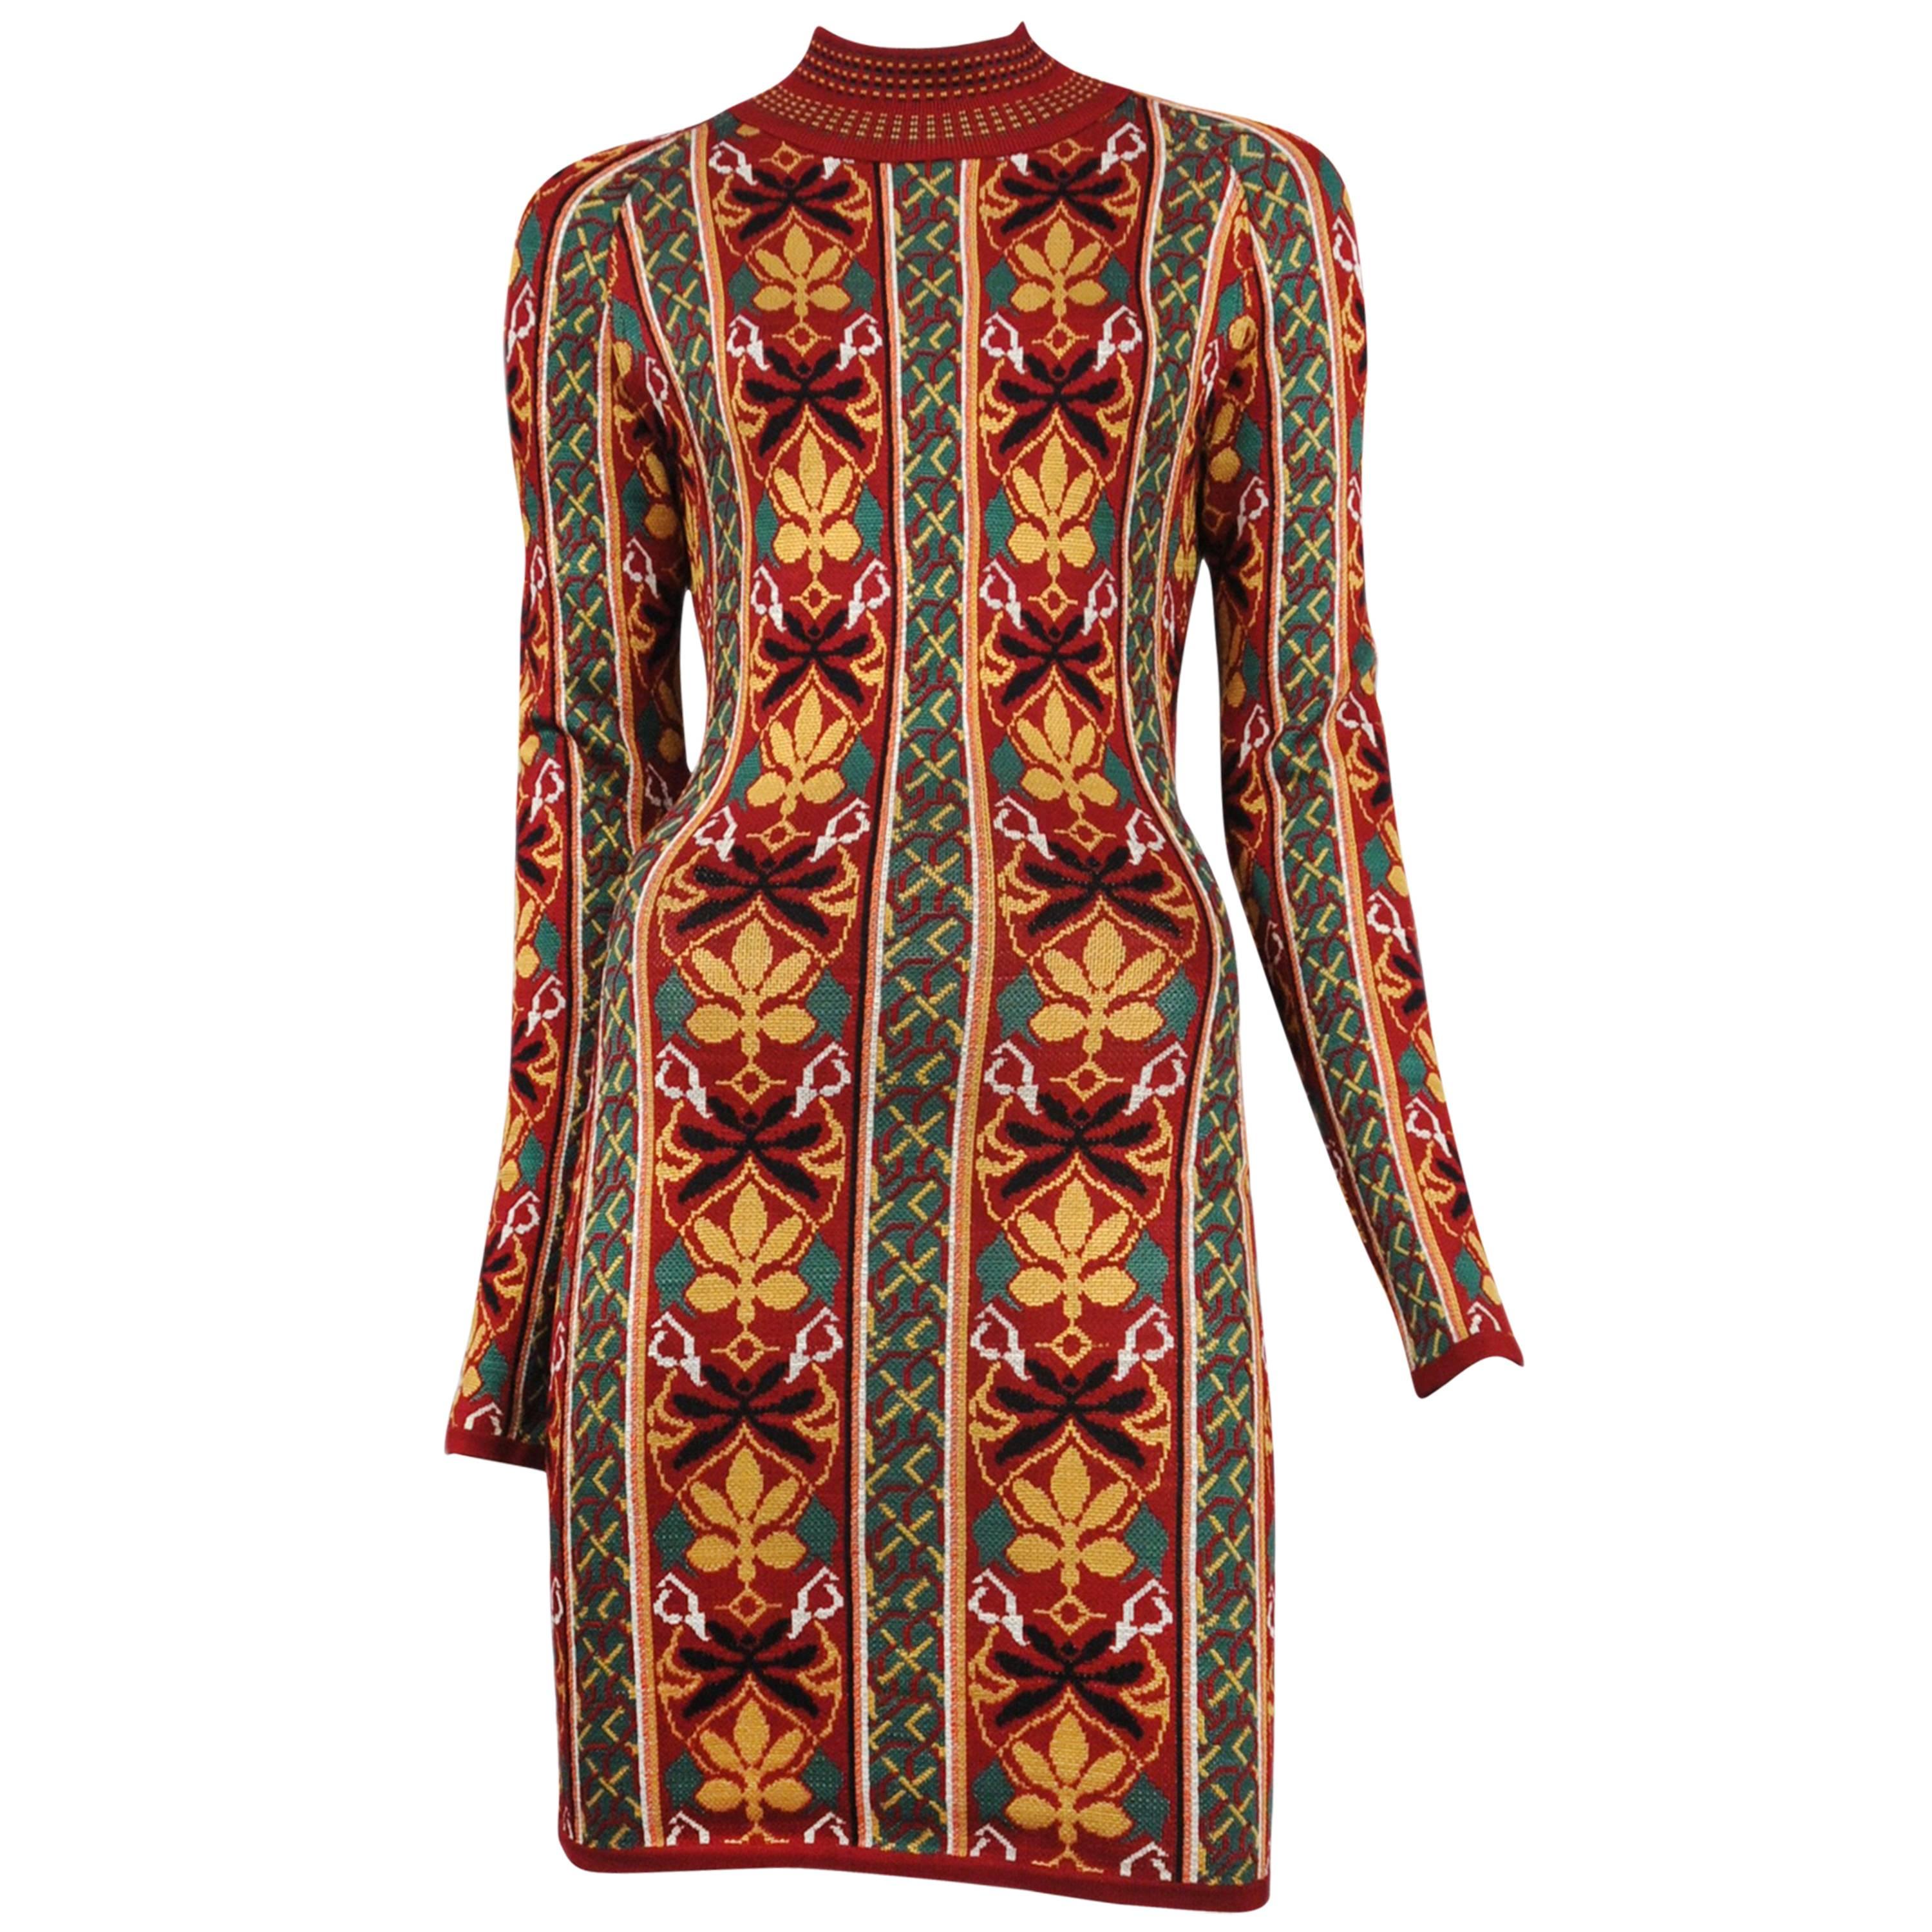 Vintage Azzedine Alaia red, gold and green floral pattern knit body con dress featuring a mock turtleneck and long sleeves.
Please inquire for additional images.